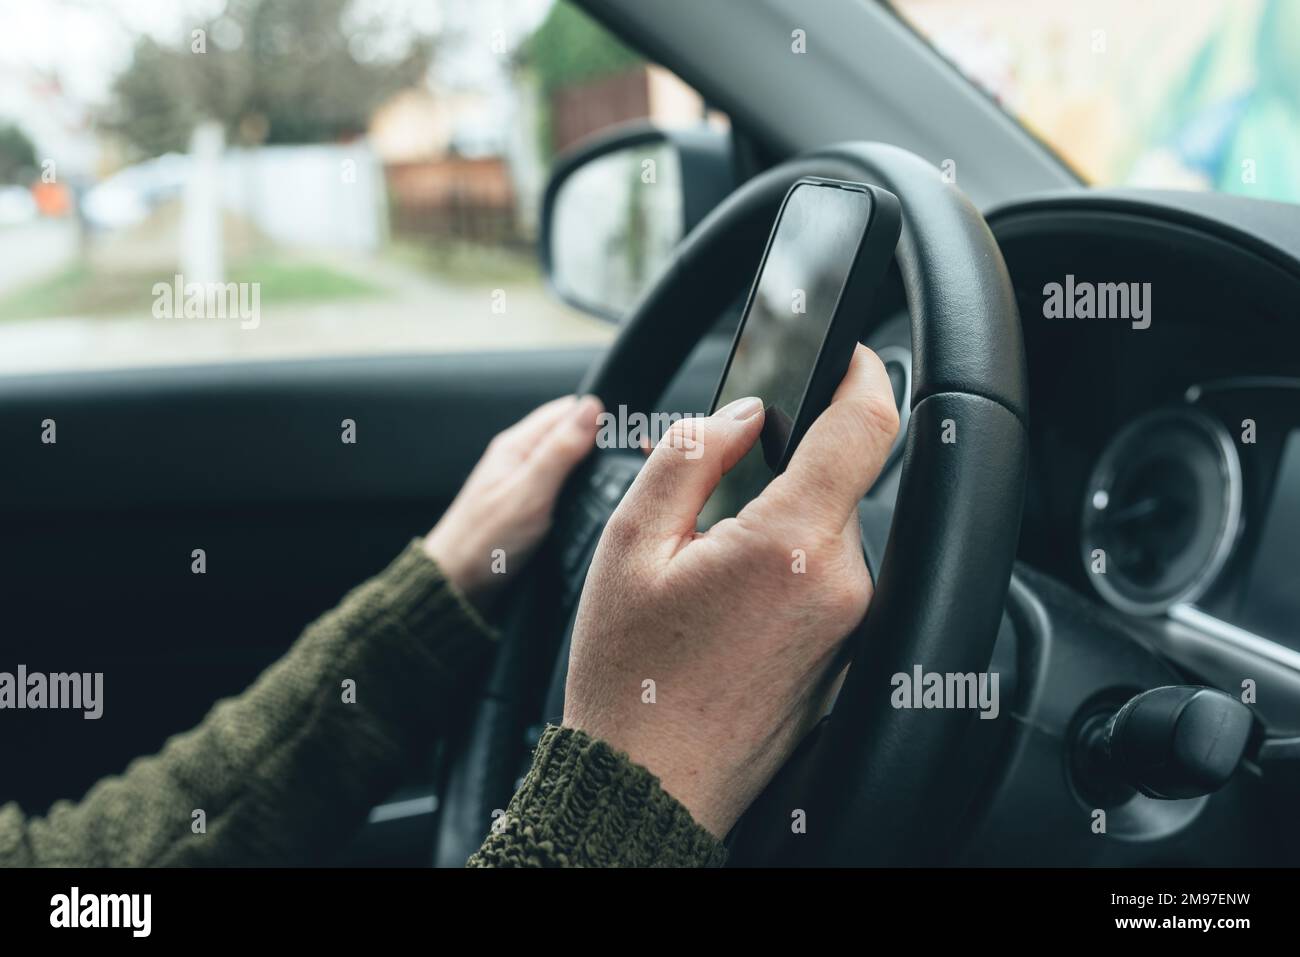 Closeup shot of female hand typing message on smartphone device, casual woman driver wearing green knitted sweater using mobile phone in vehicle inter Stock Photo